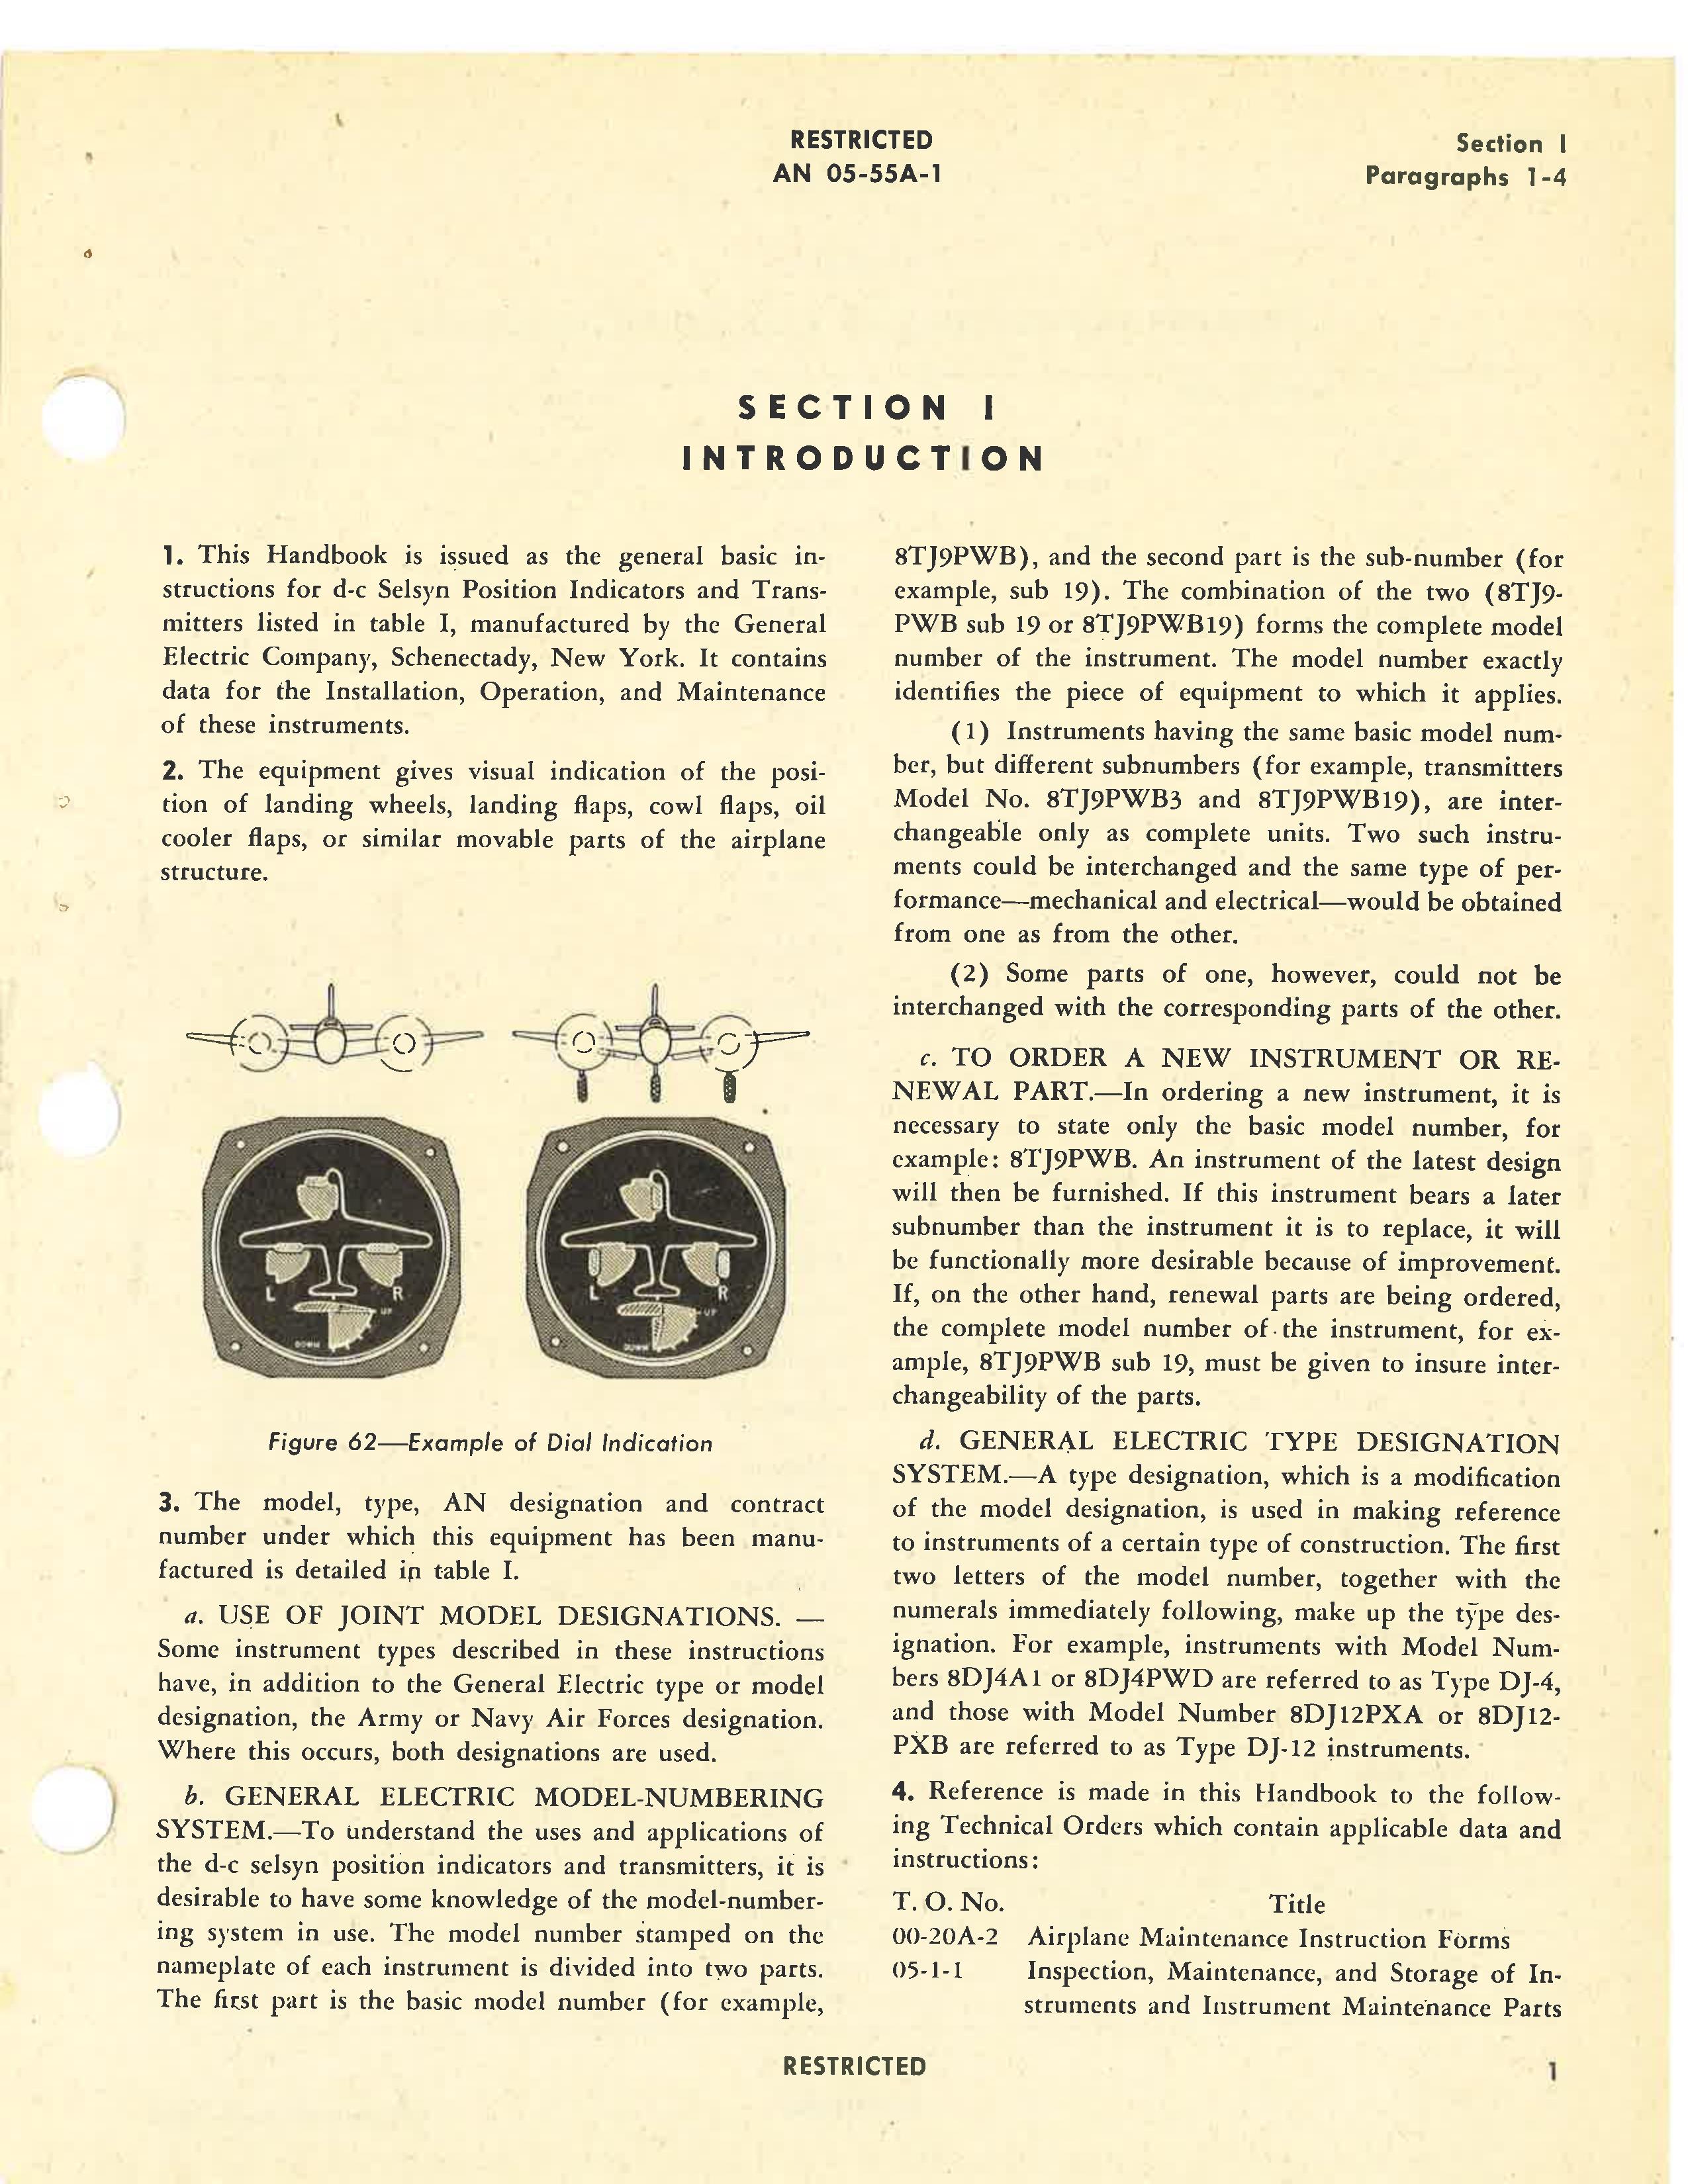 Sample page 7 from AirCorps Library document: Operation and Service Instructions for D-C Selsyn Position Indicators and Transmitters